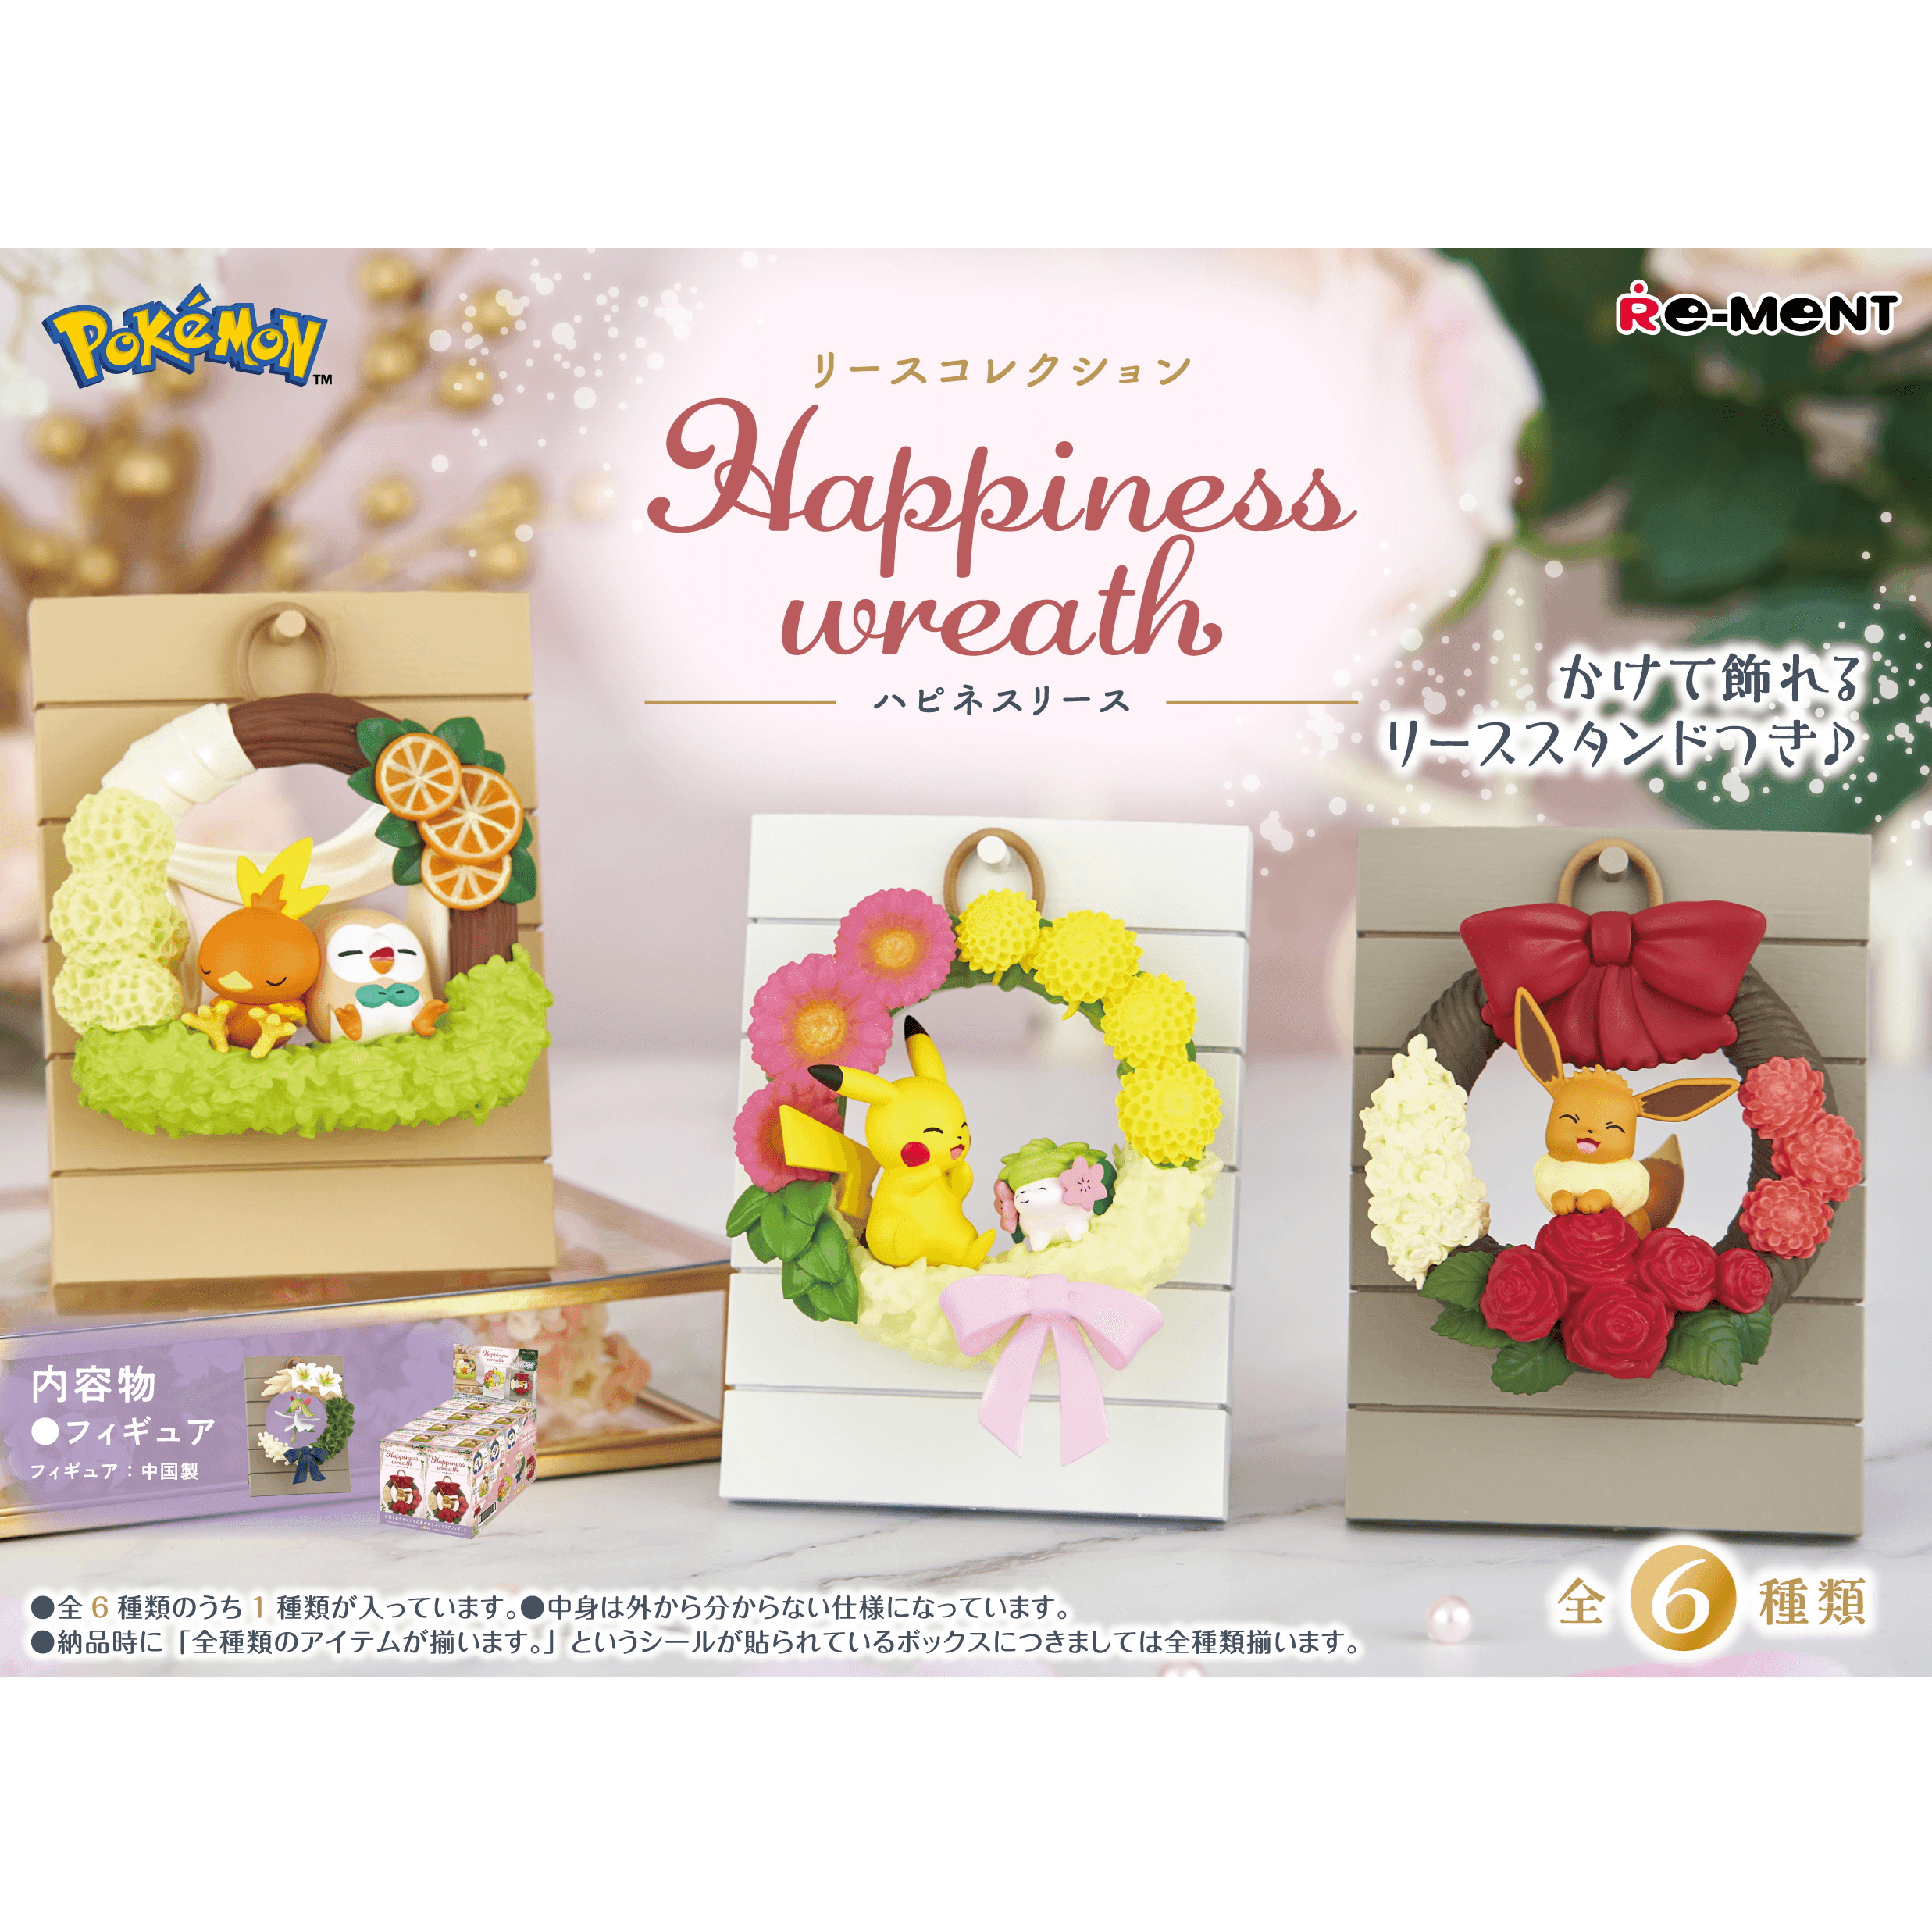 POKEMON Wreaths Collection - Happiness wreath